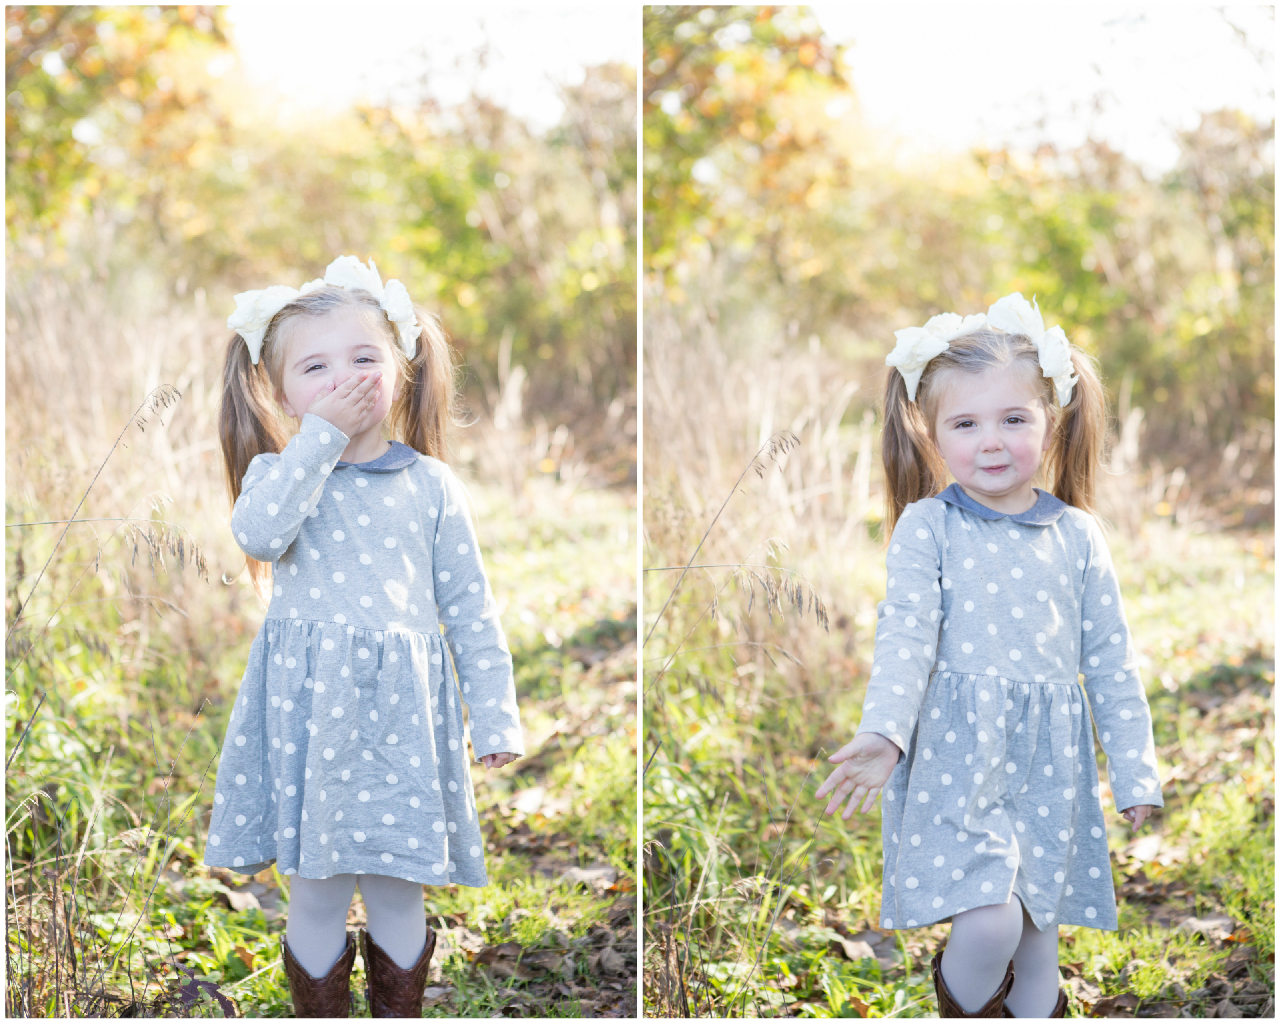 Fall Photo Session | The Day's Design | Hetler Photography